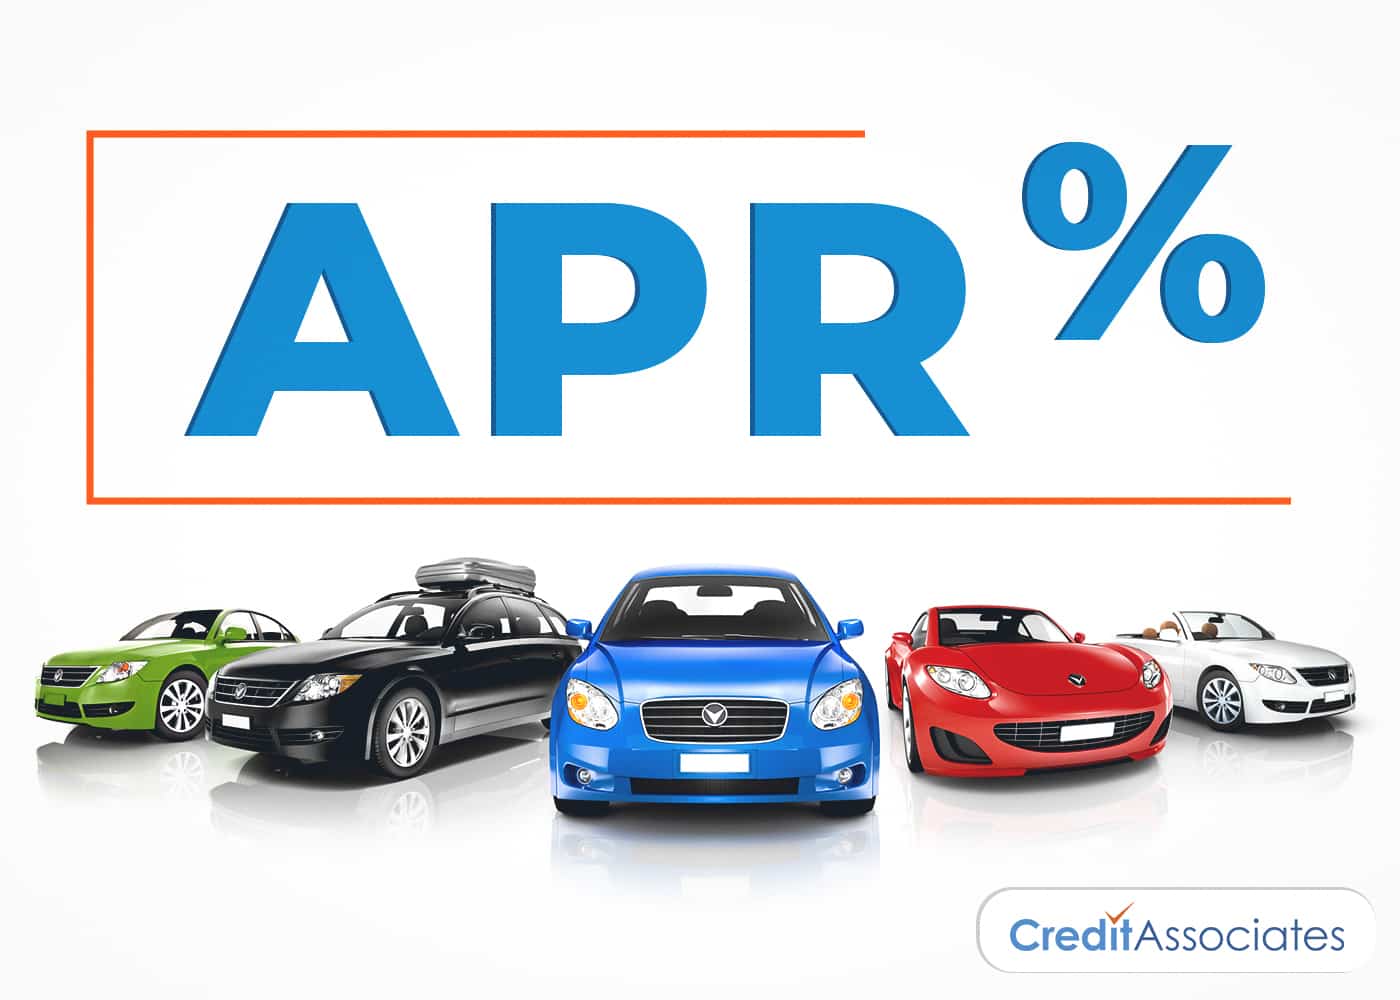 What Is a Good APR for a Car?